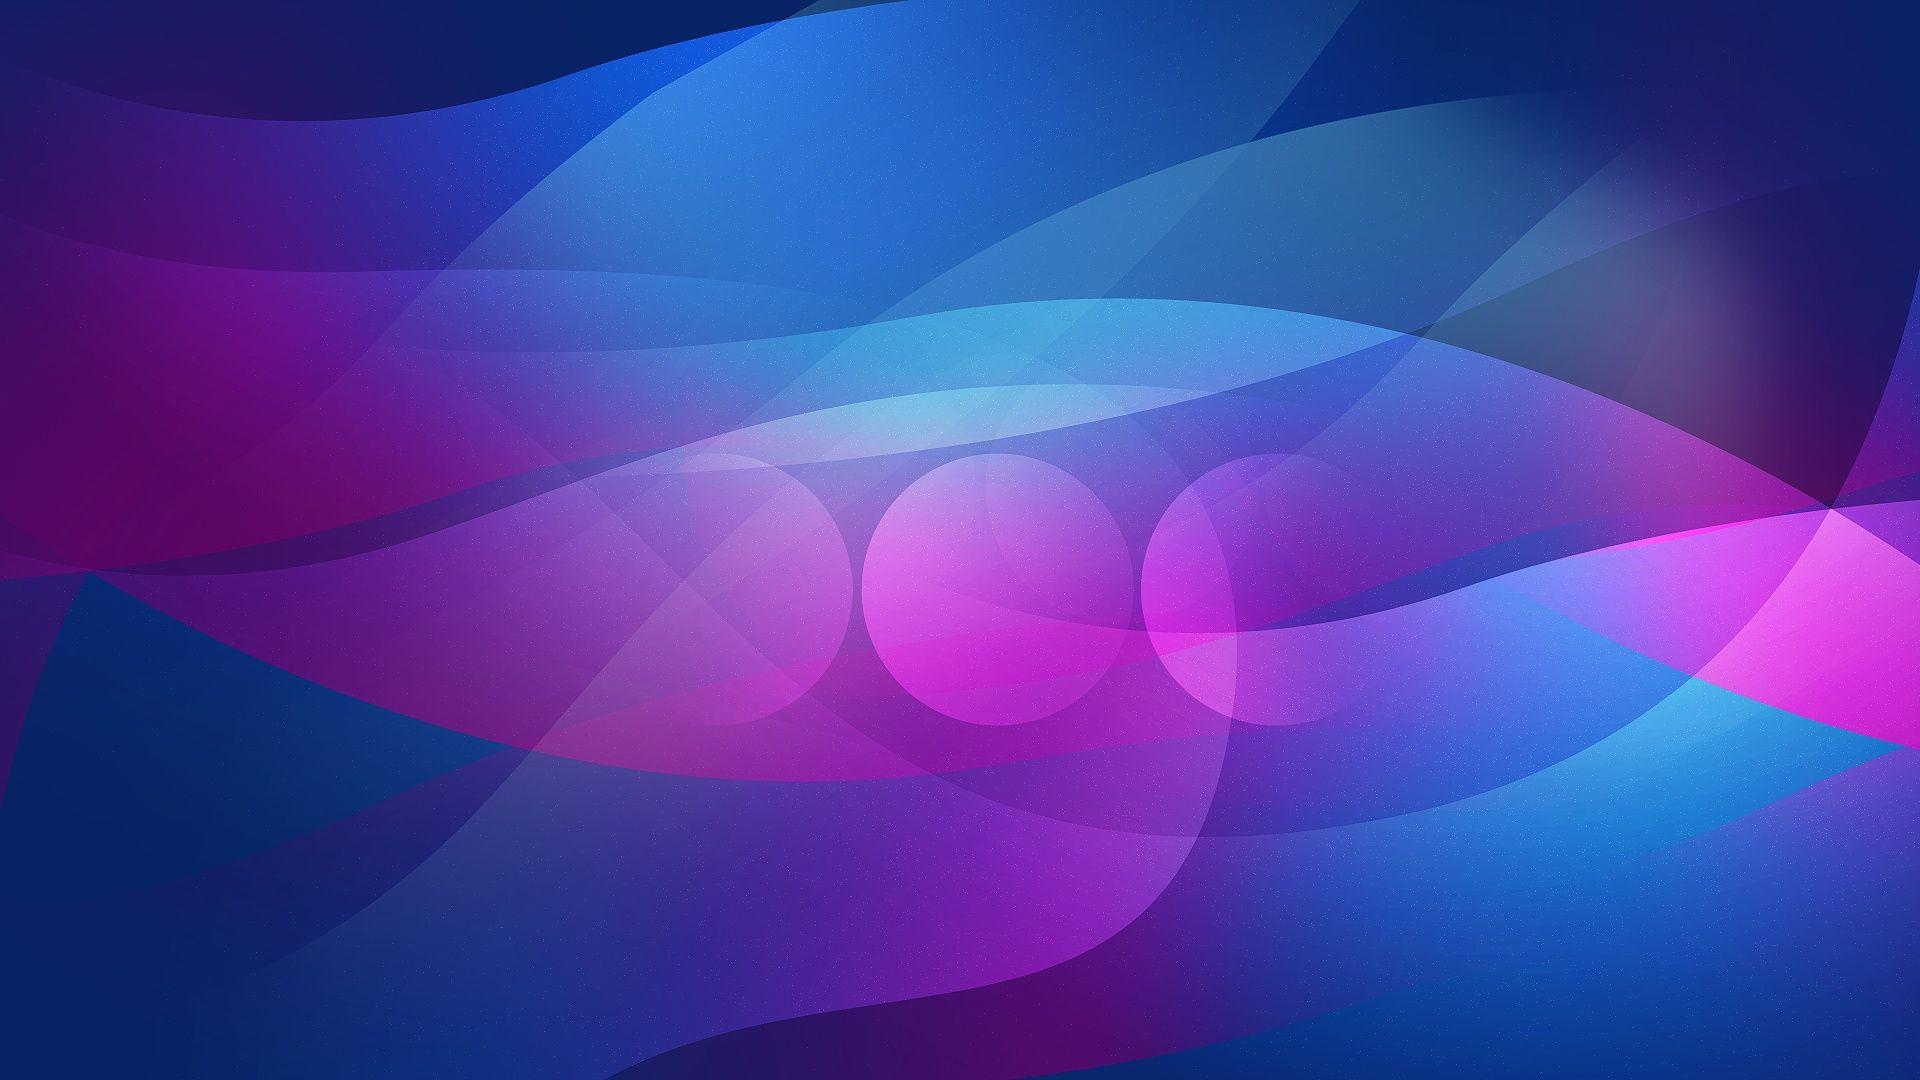 Background Abstract Purple Wallpaper 1920x1200PX Purple Abstract